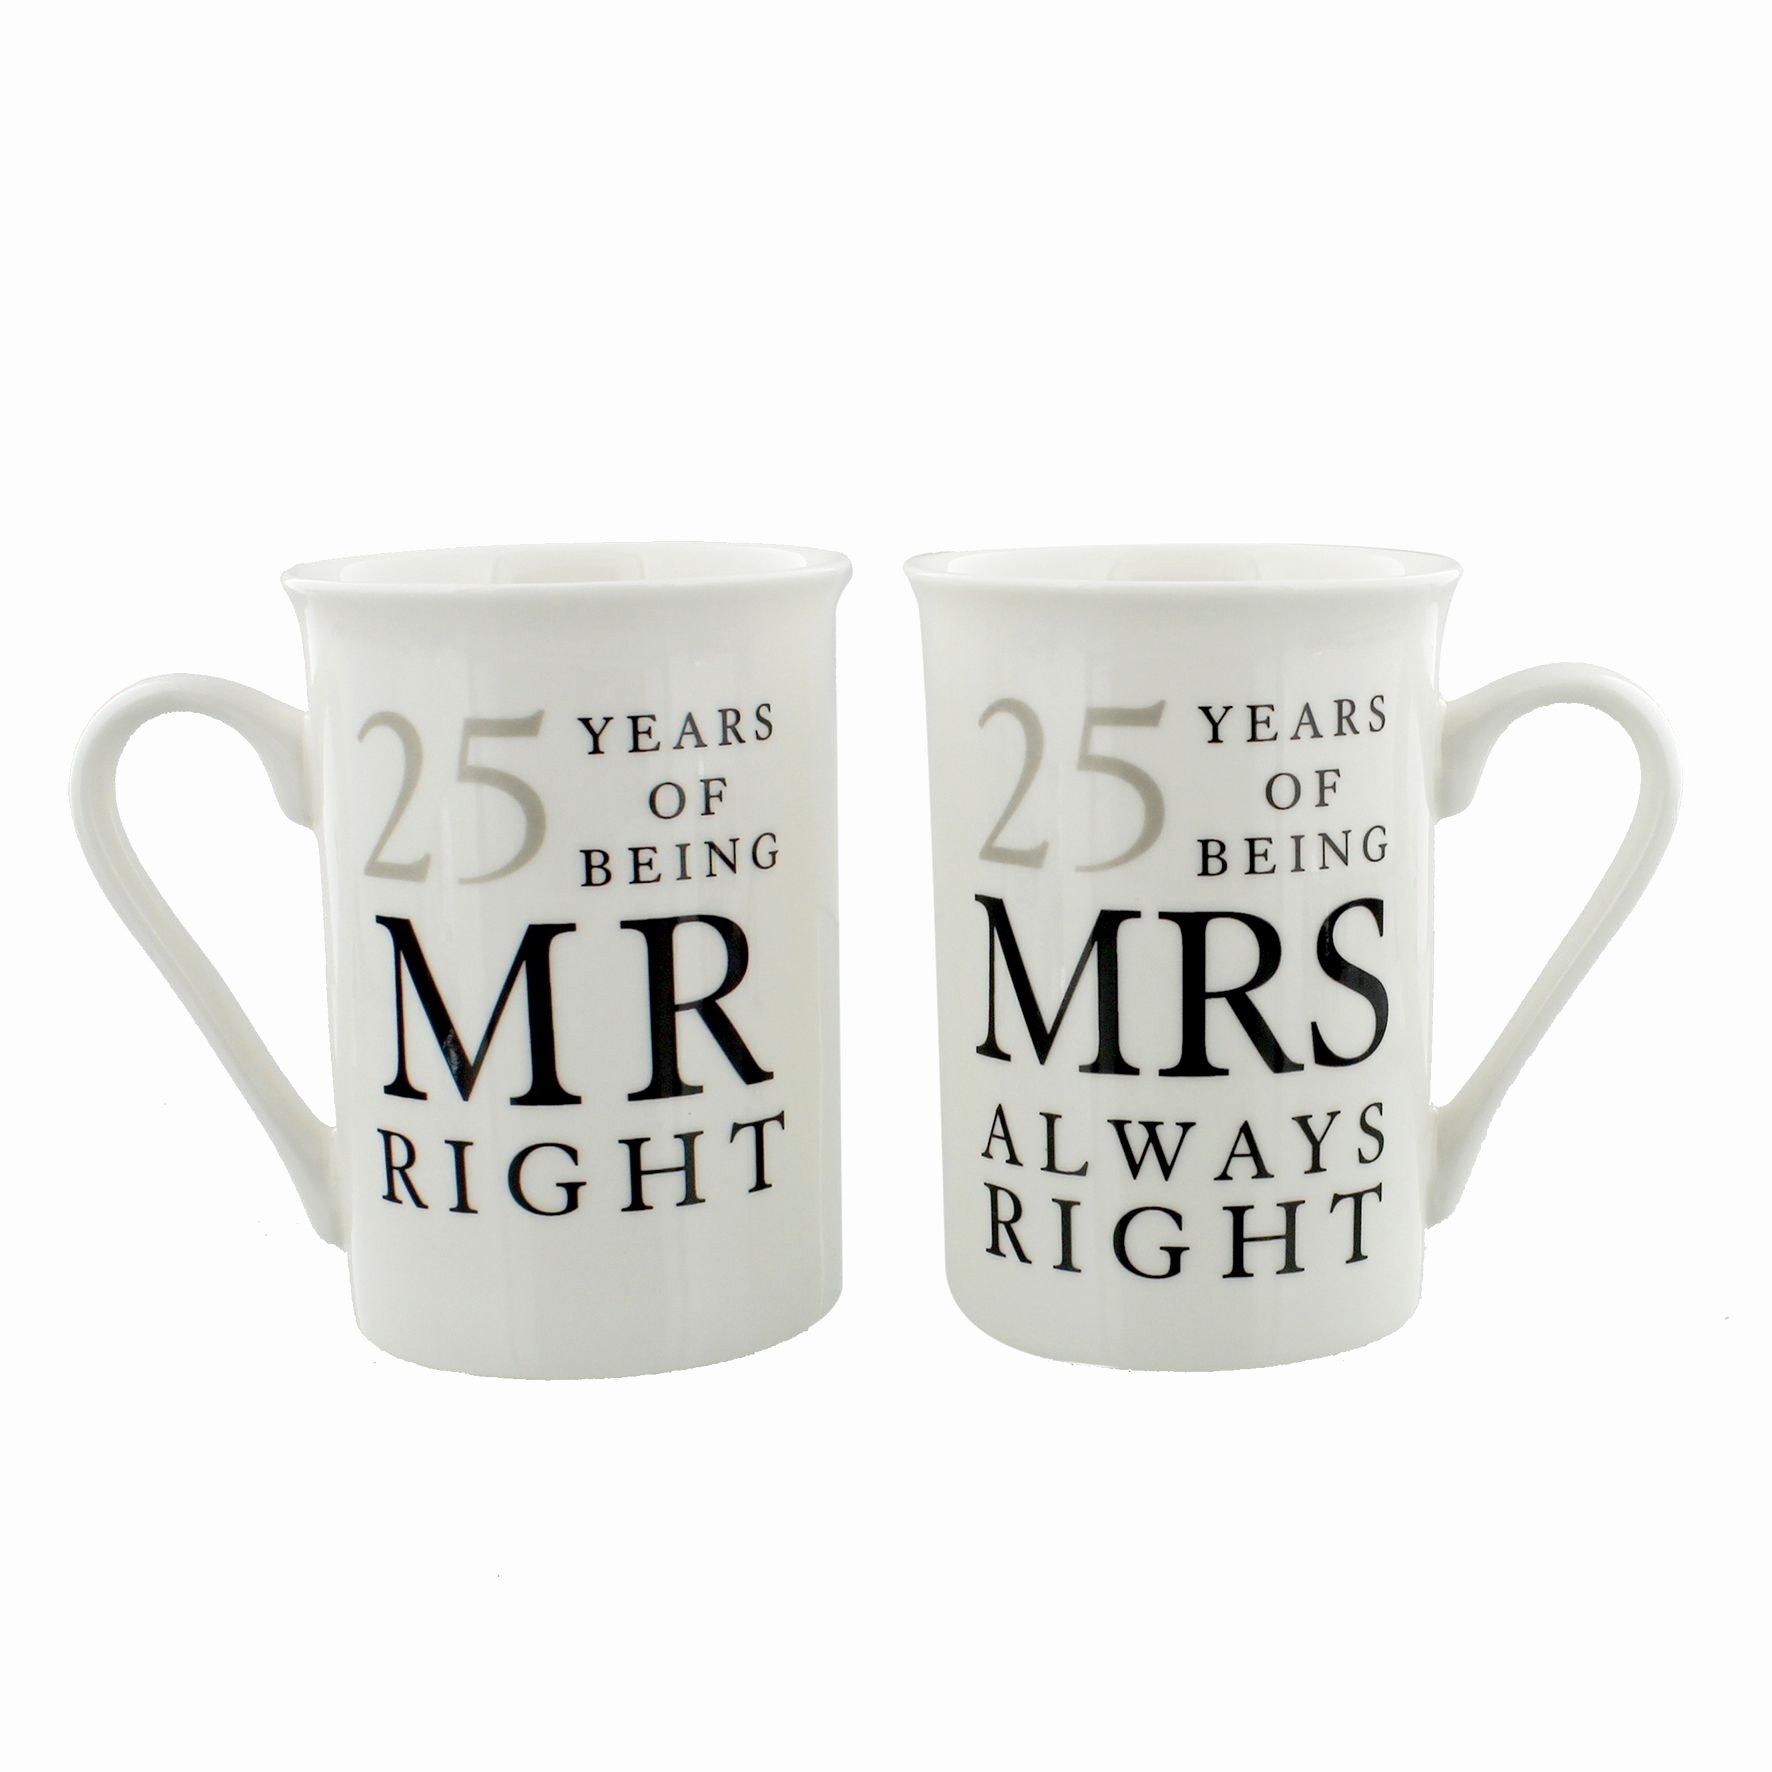 Gifts For 25th Wedding Anniversary To A Couple
 10 Stylish Gift Ideas For 25Th Anniversary 2020